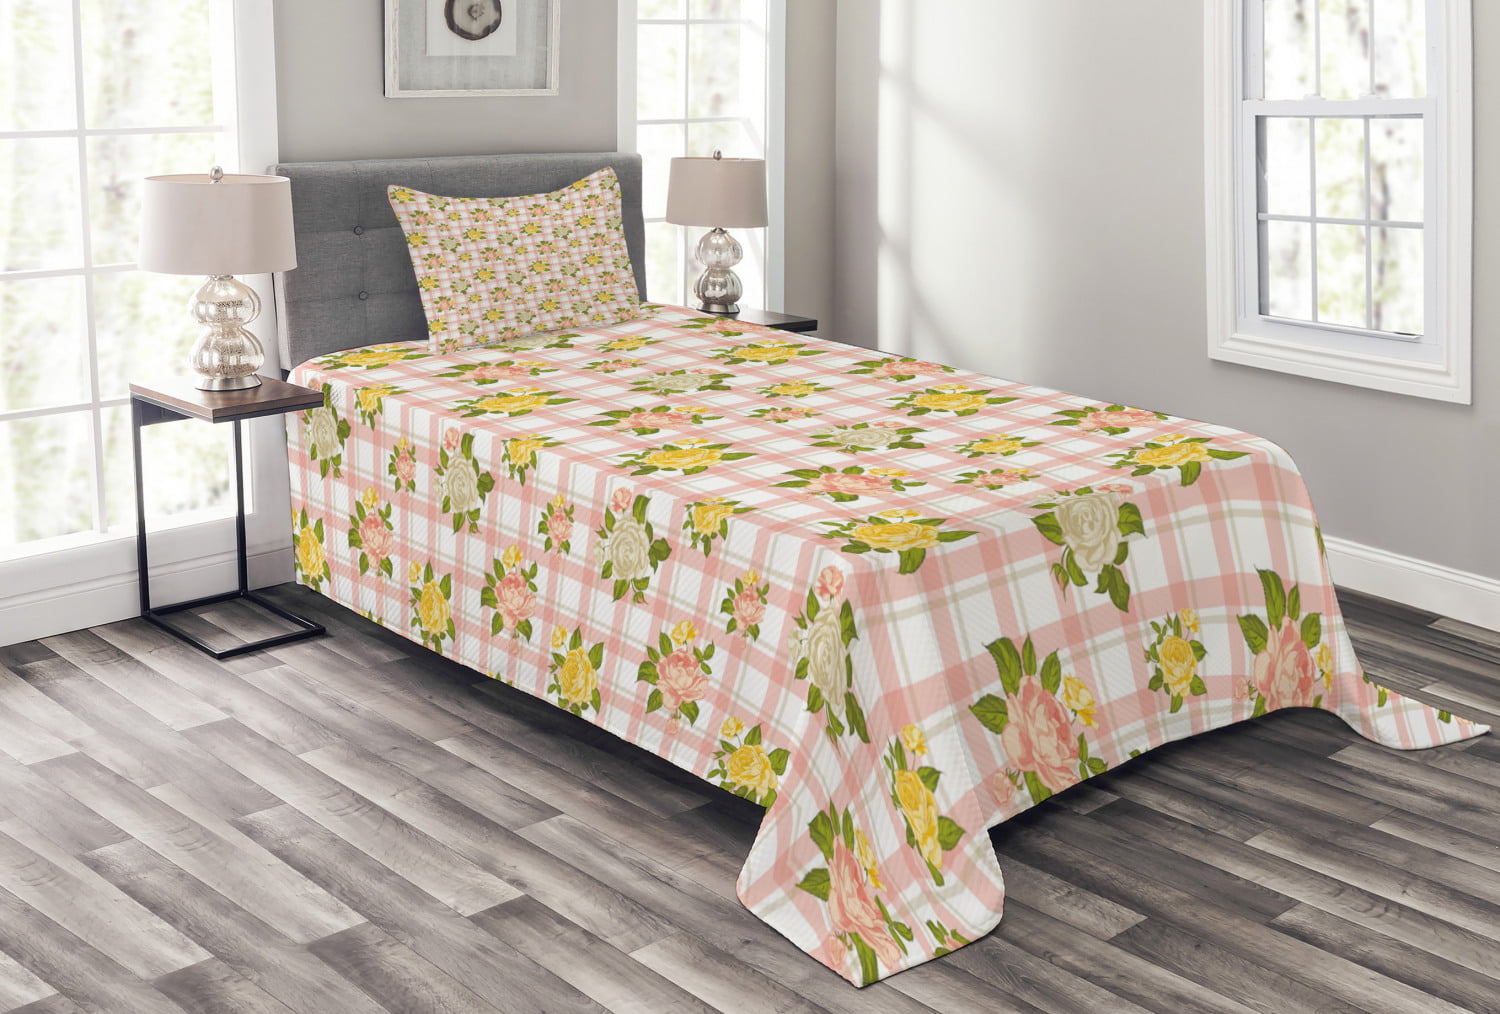 Details about   Quilt Bed Set Ruffle Floral Shabby Chic Design Twin Size Bedding Cover Sham GIFT 